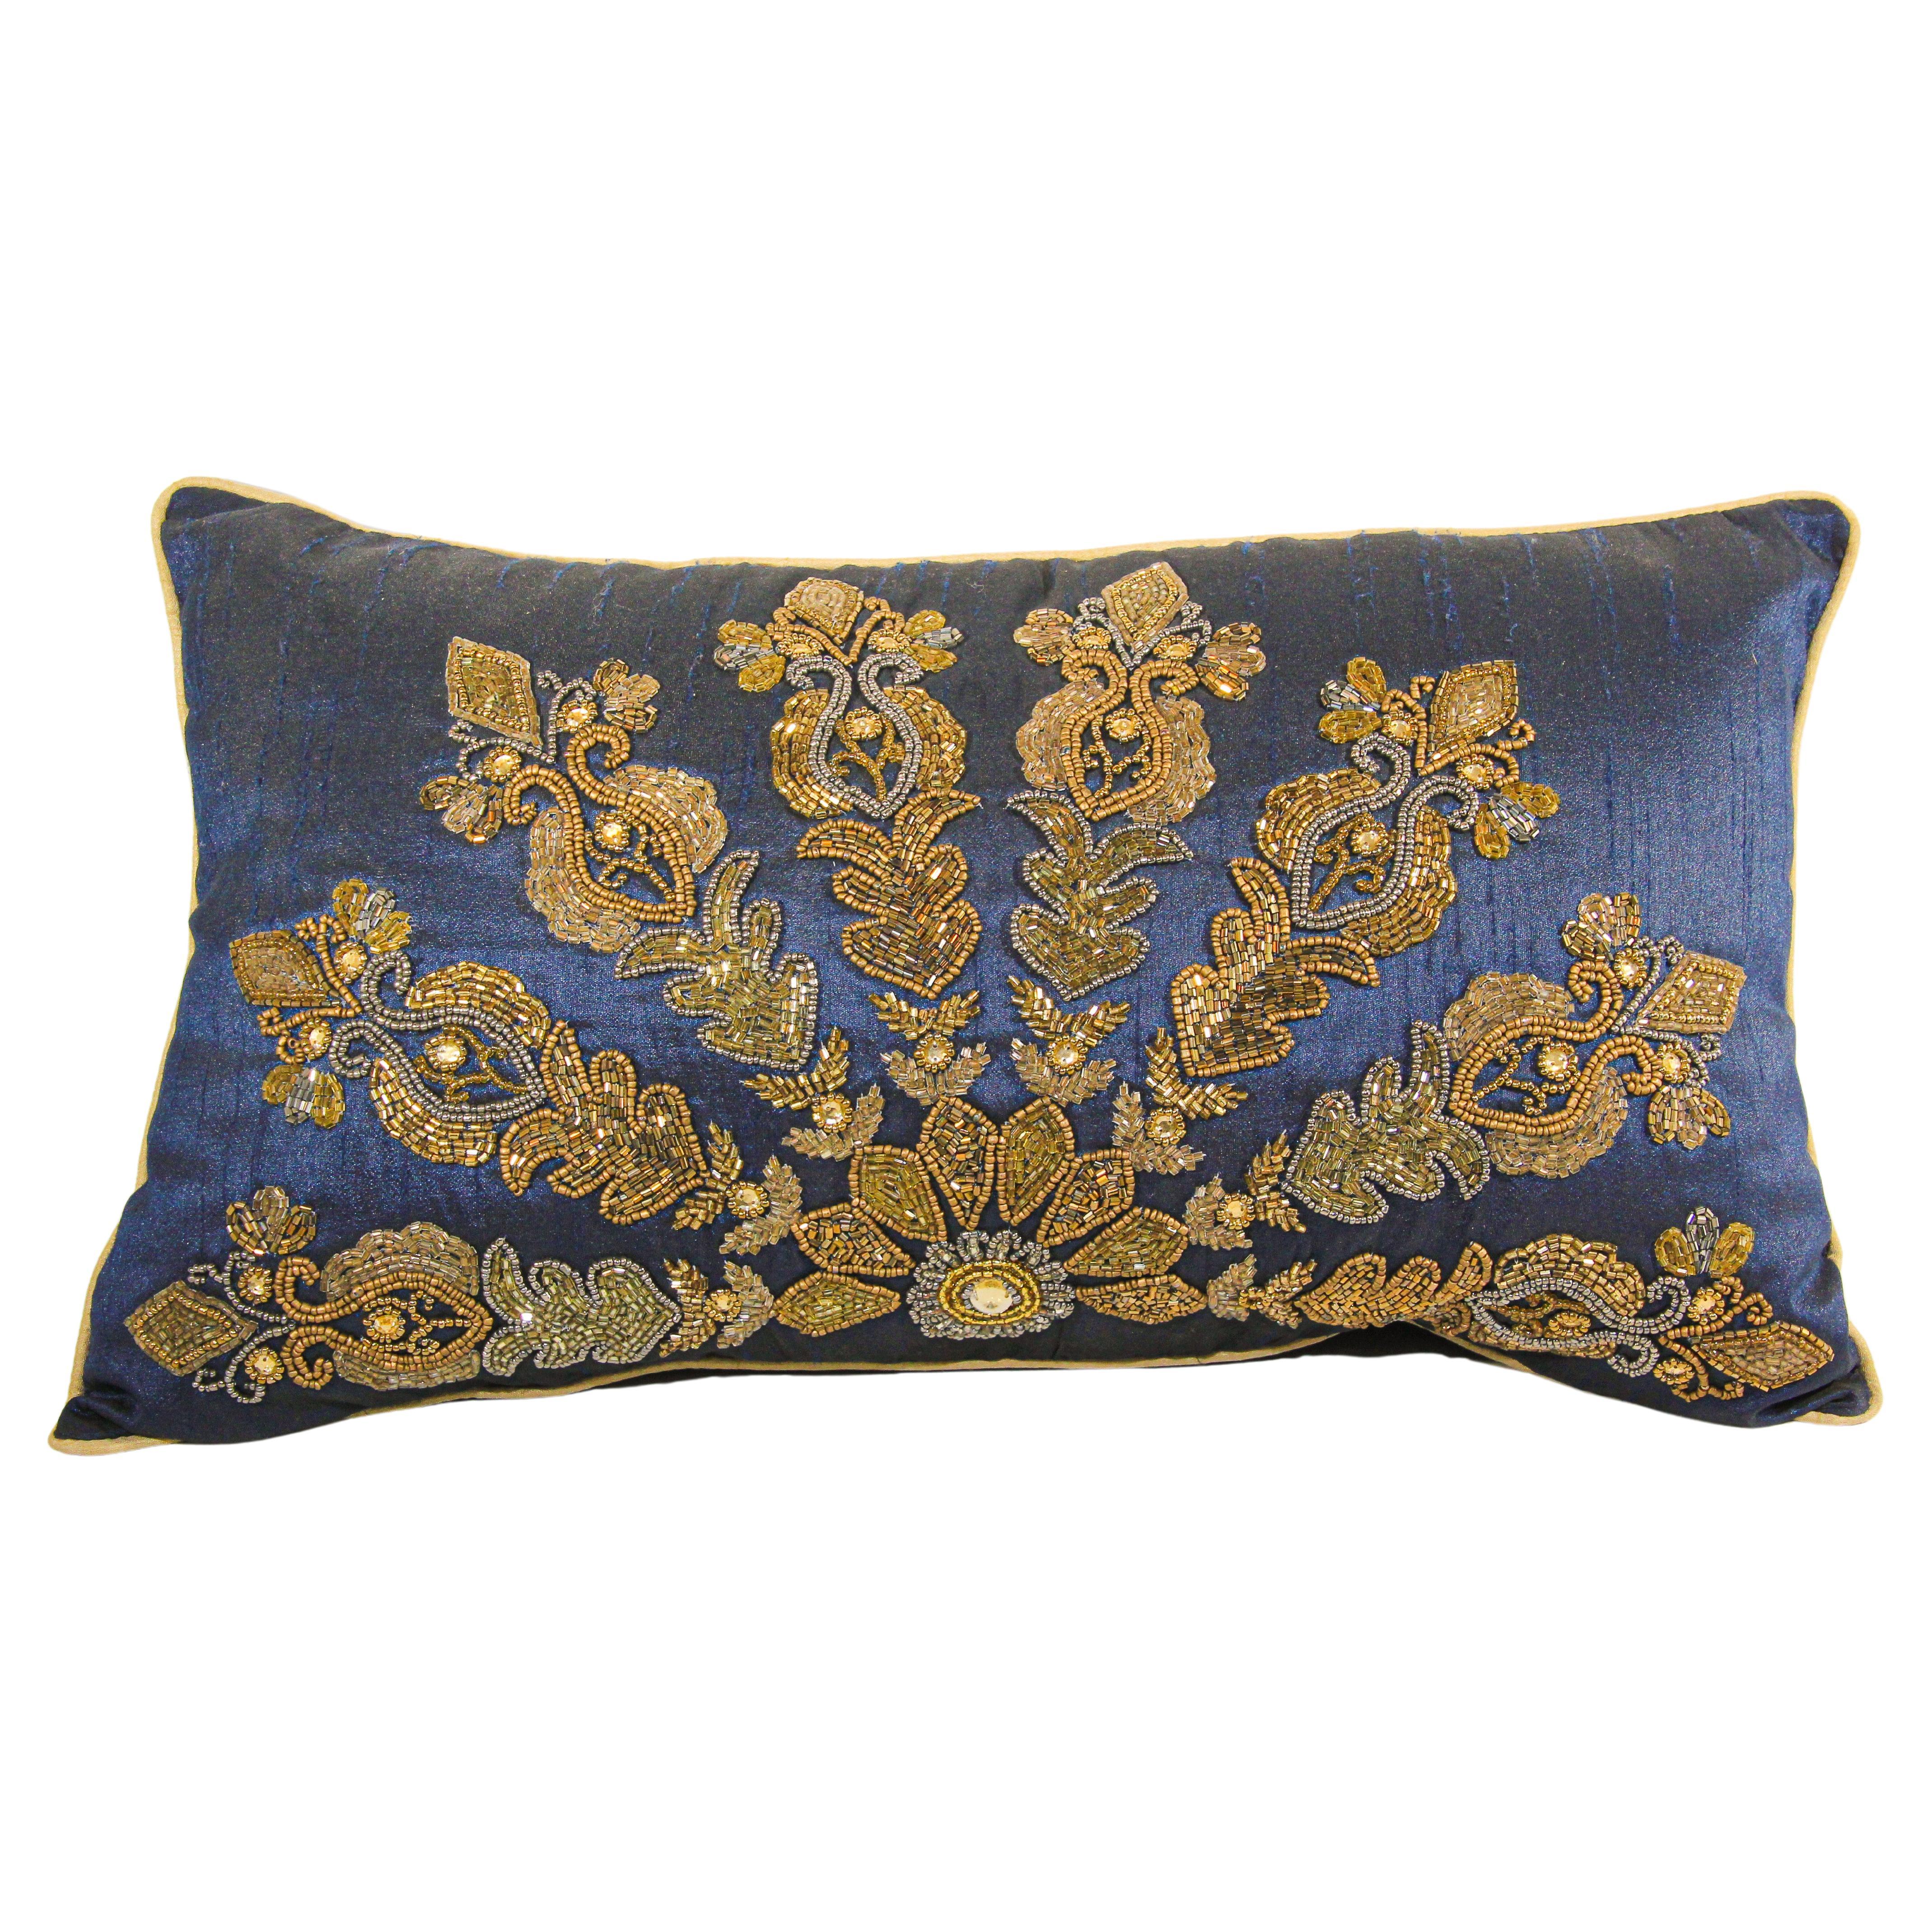 Mughal Royal Blue Silk Throw Pillow Embroidered with Gold Peacocks